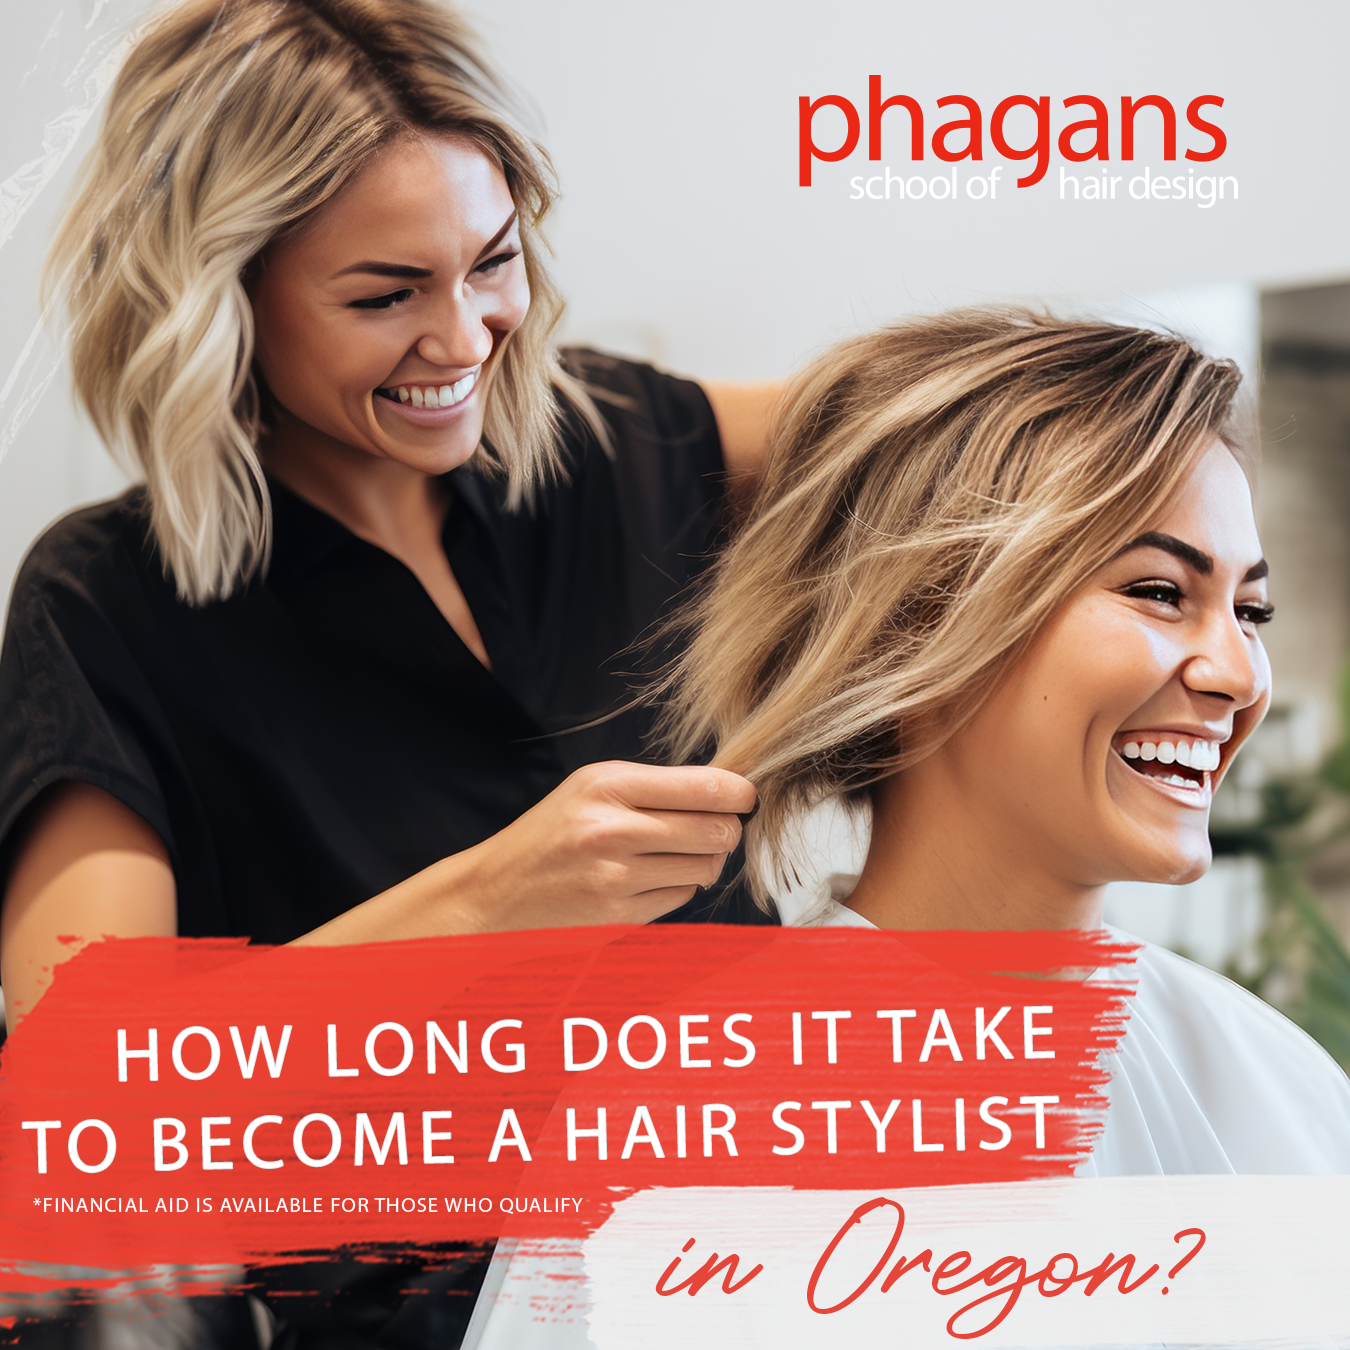 How Long Does It Take to Become a Hair Stylist in Oregon?